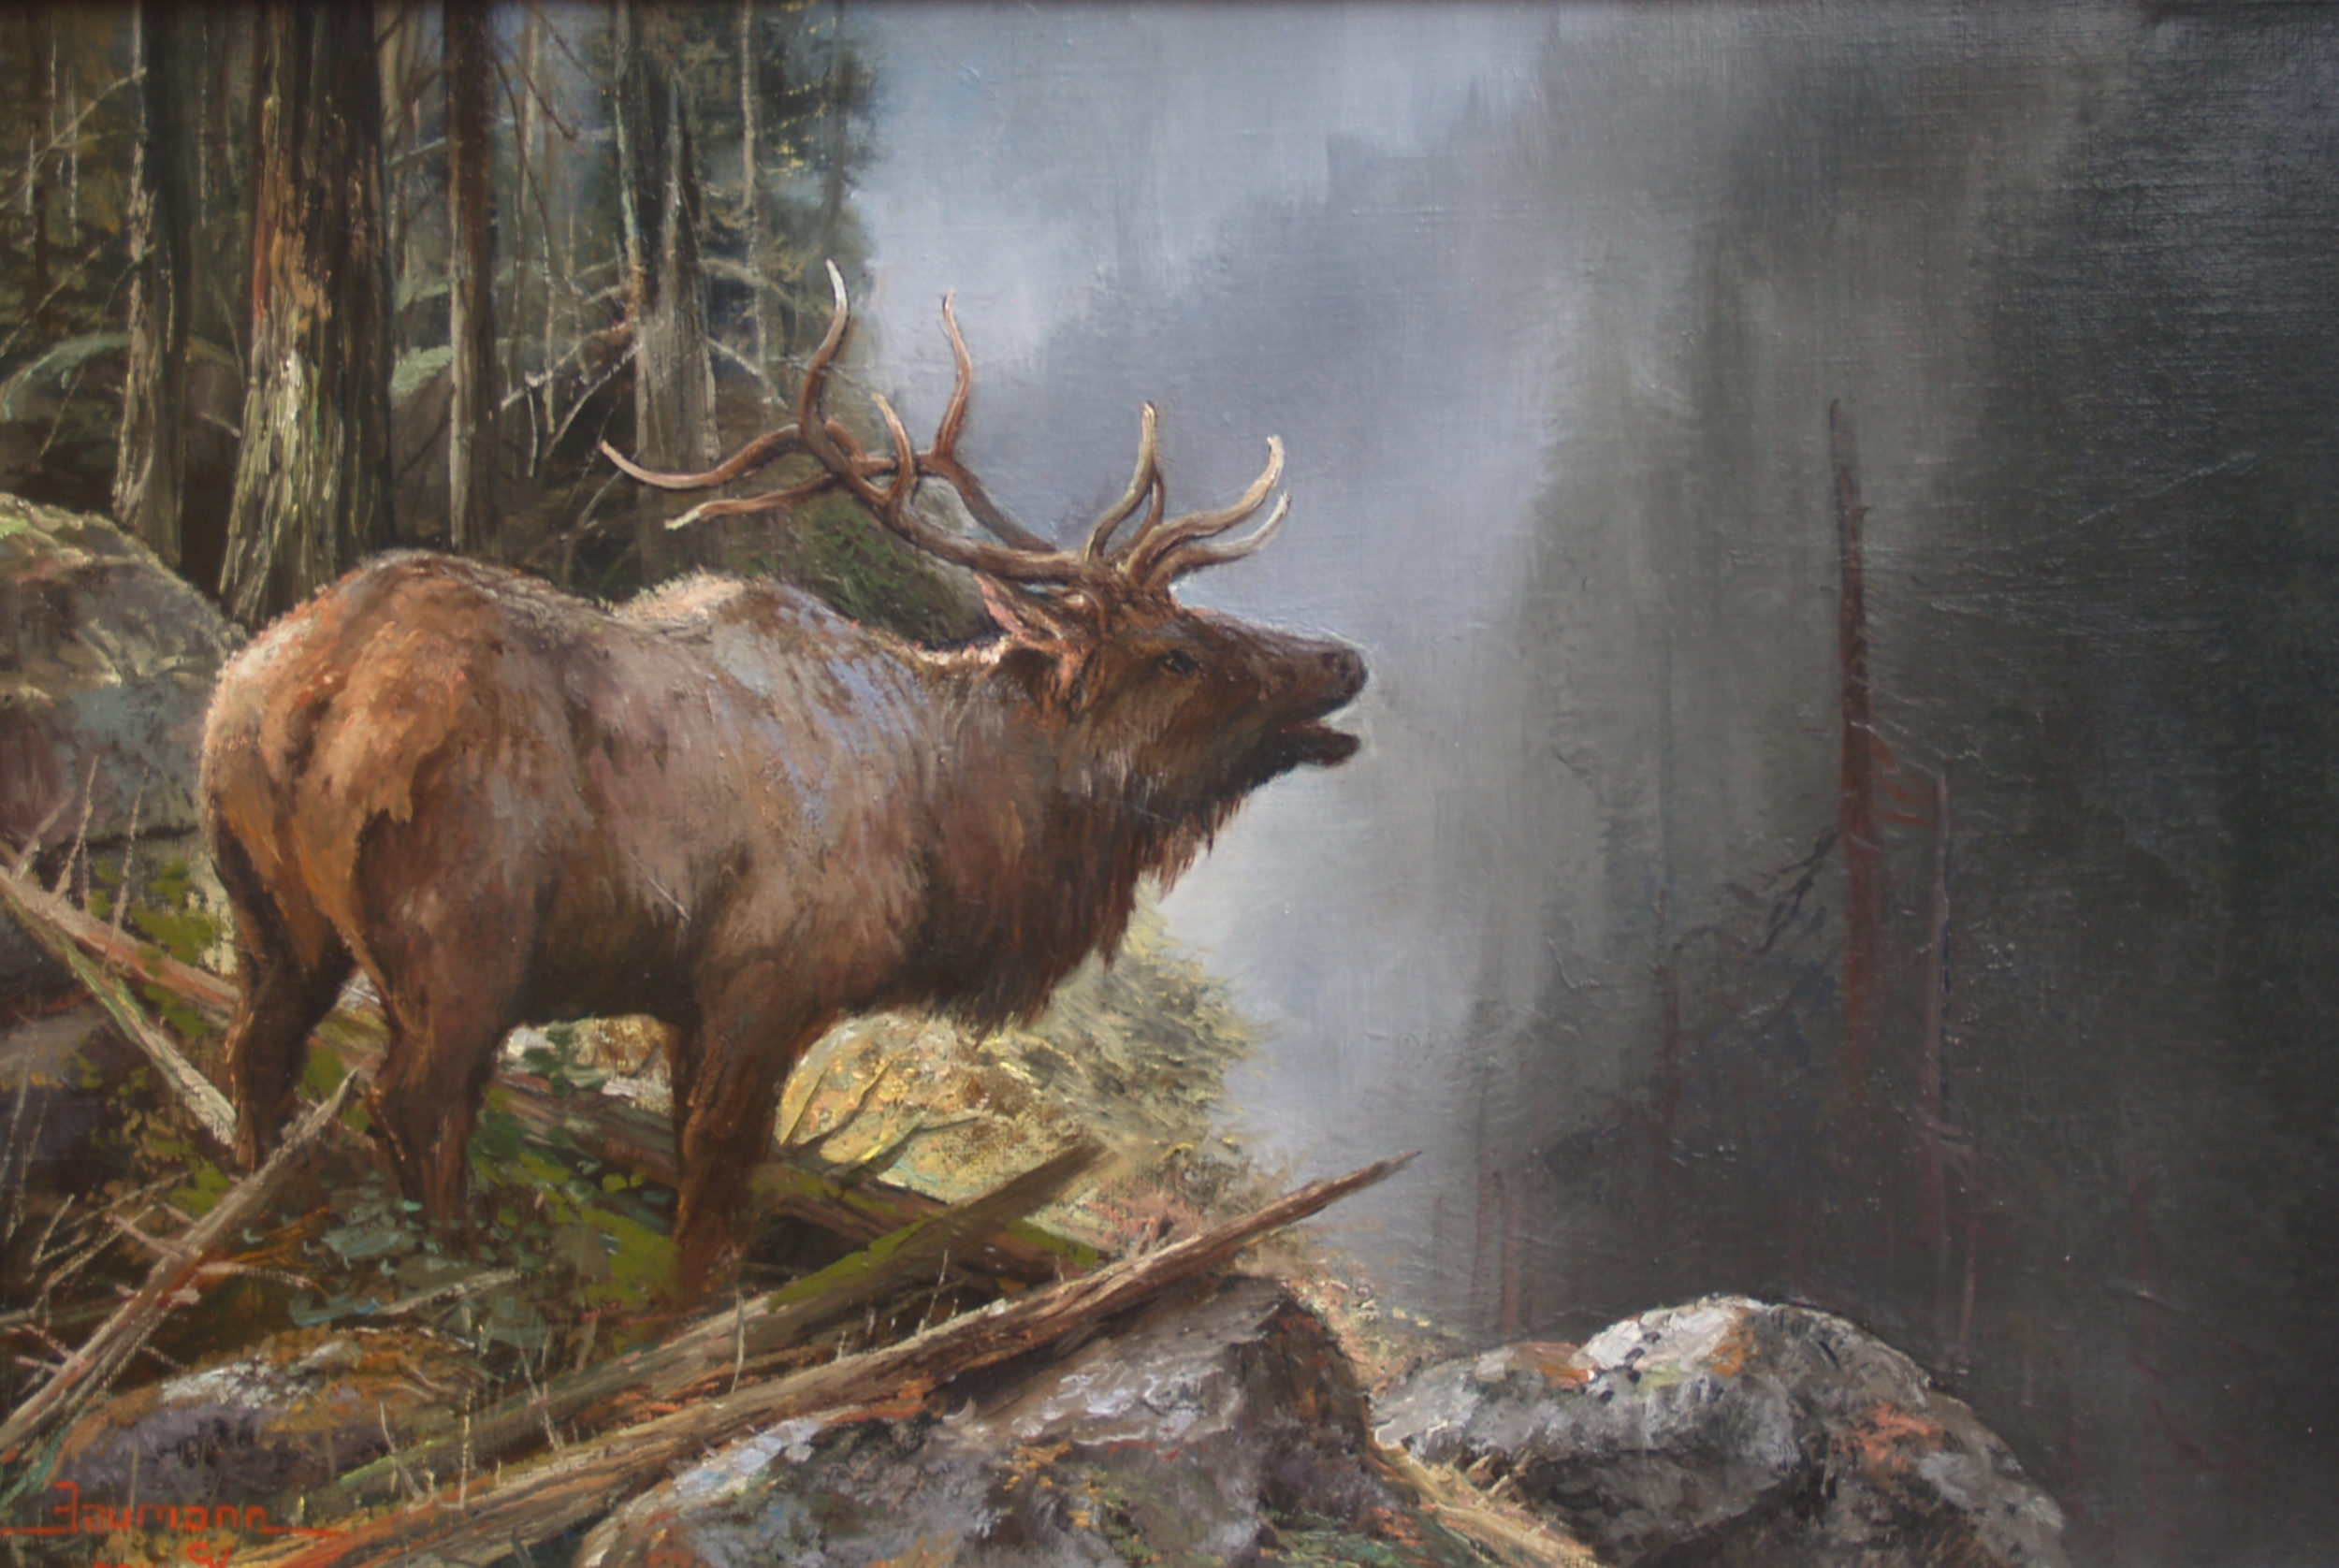 This is an oil painting of an Elk breaking the silence of the forest with his call painted by artist Stefan Baumann in the mountains near Mt. Shasta, California